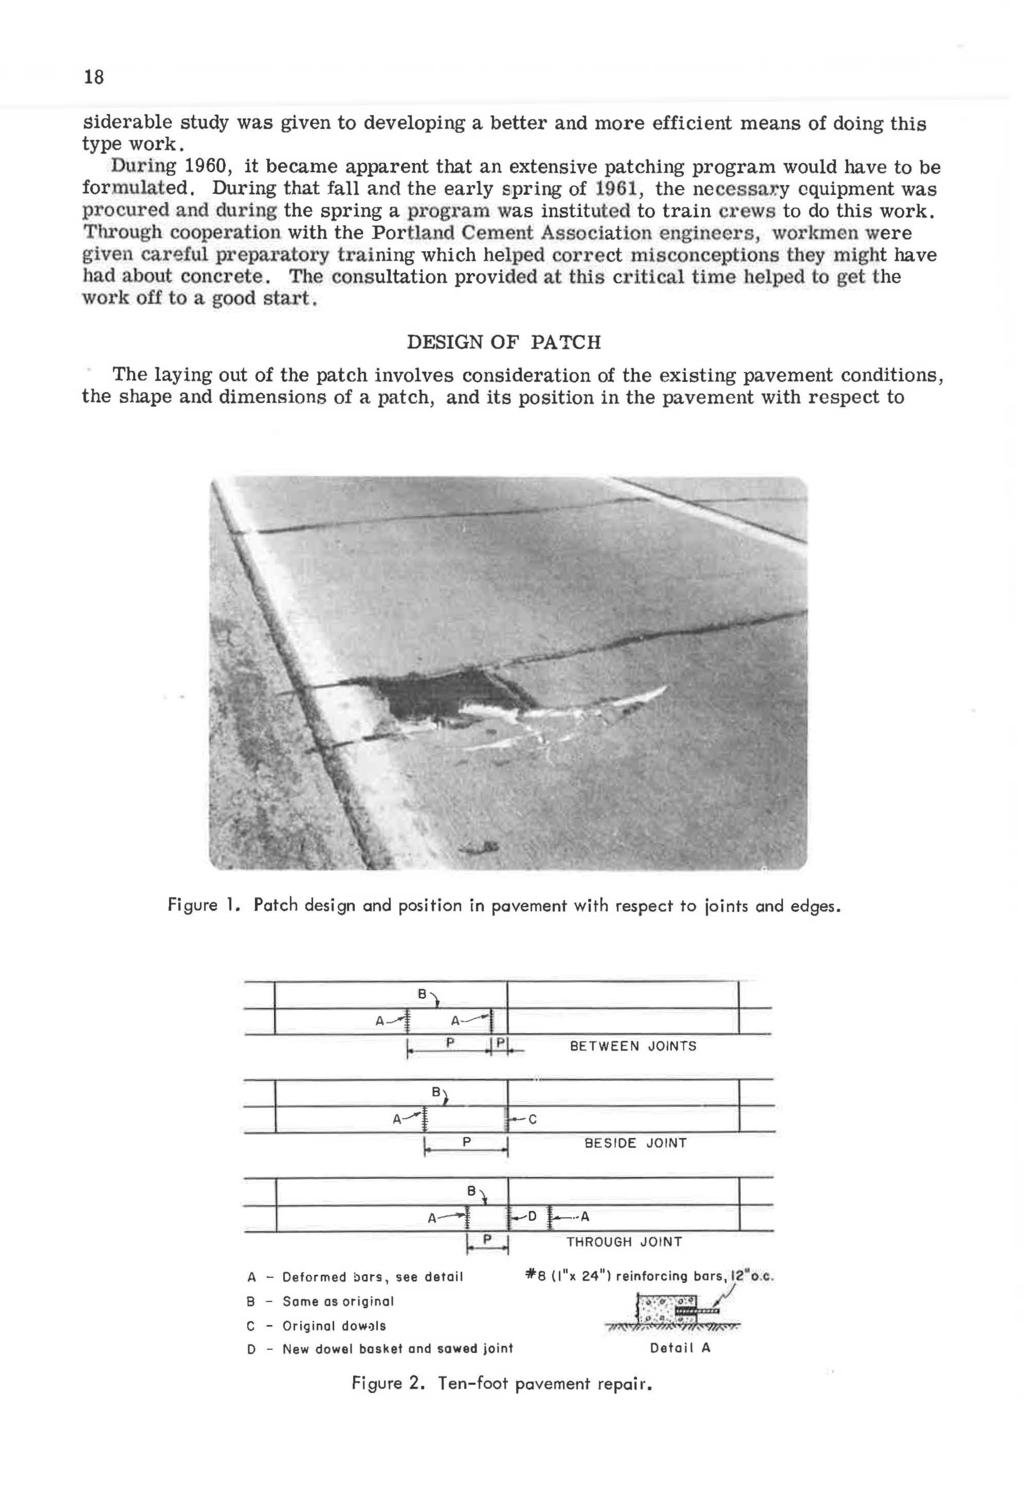 18 siderable study was given to developing a better and more efficient means of doing this type work. During 1960, it became apparent that an extensive patching program would have to be formulated.